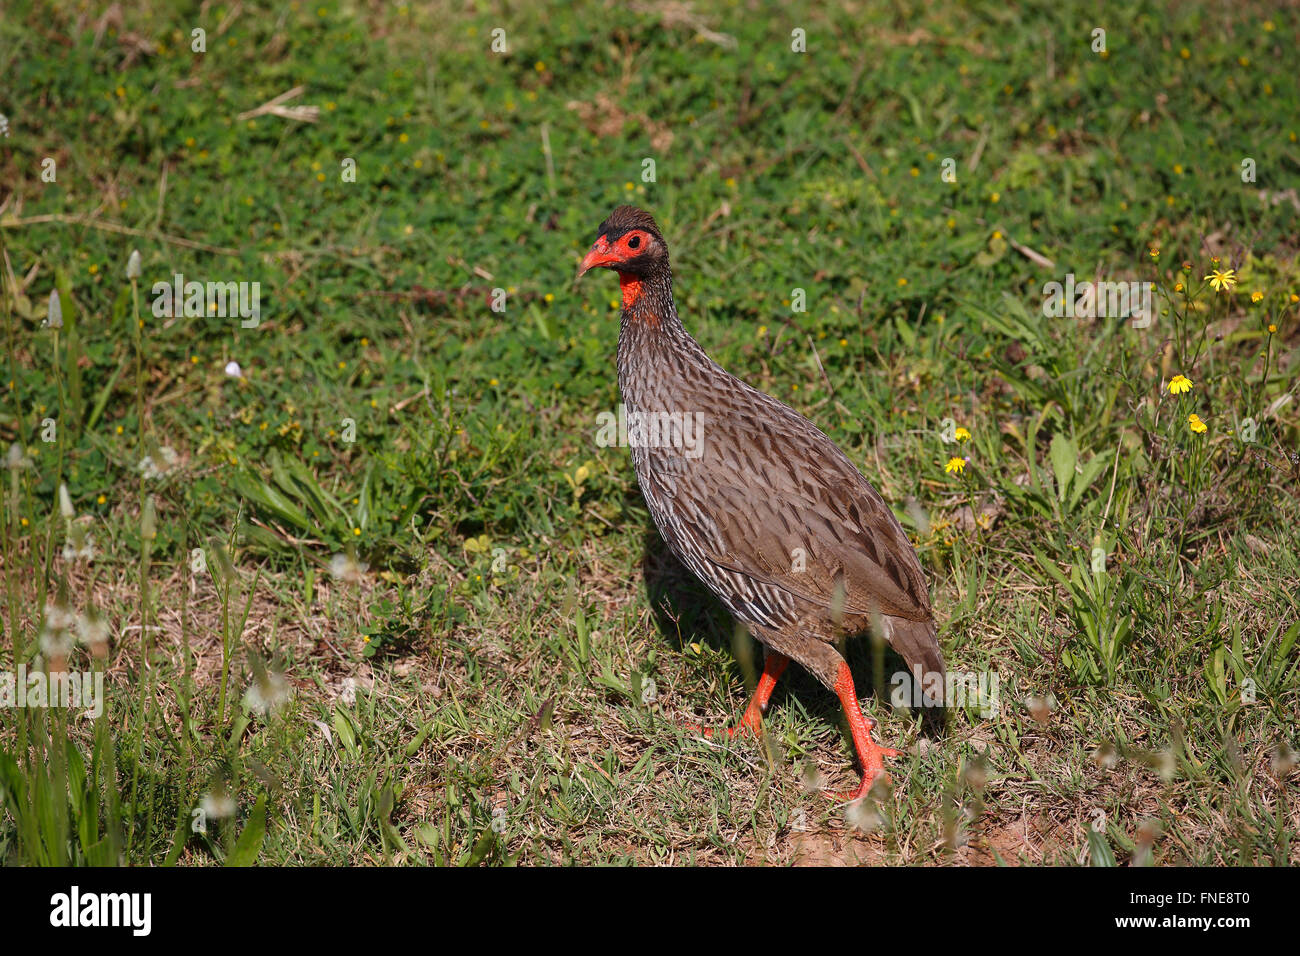 Red-necked spurfowl (Francolinus afer), Eastern Cape, South Africa Stock Photo